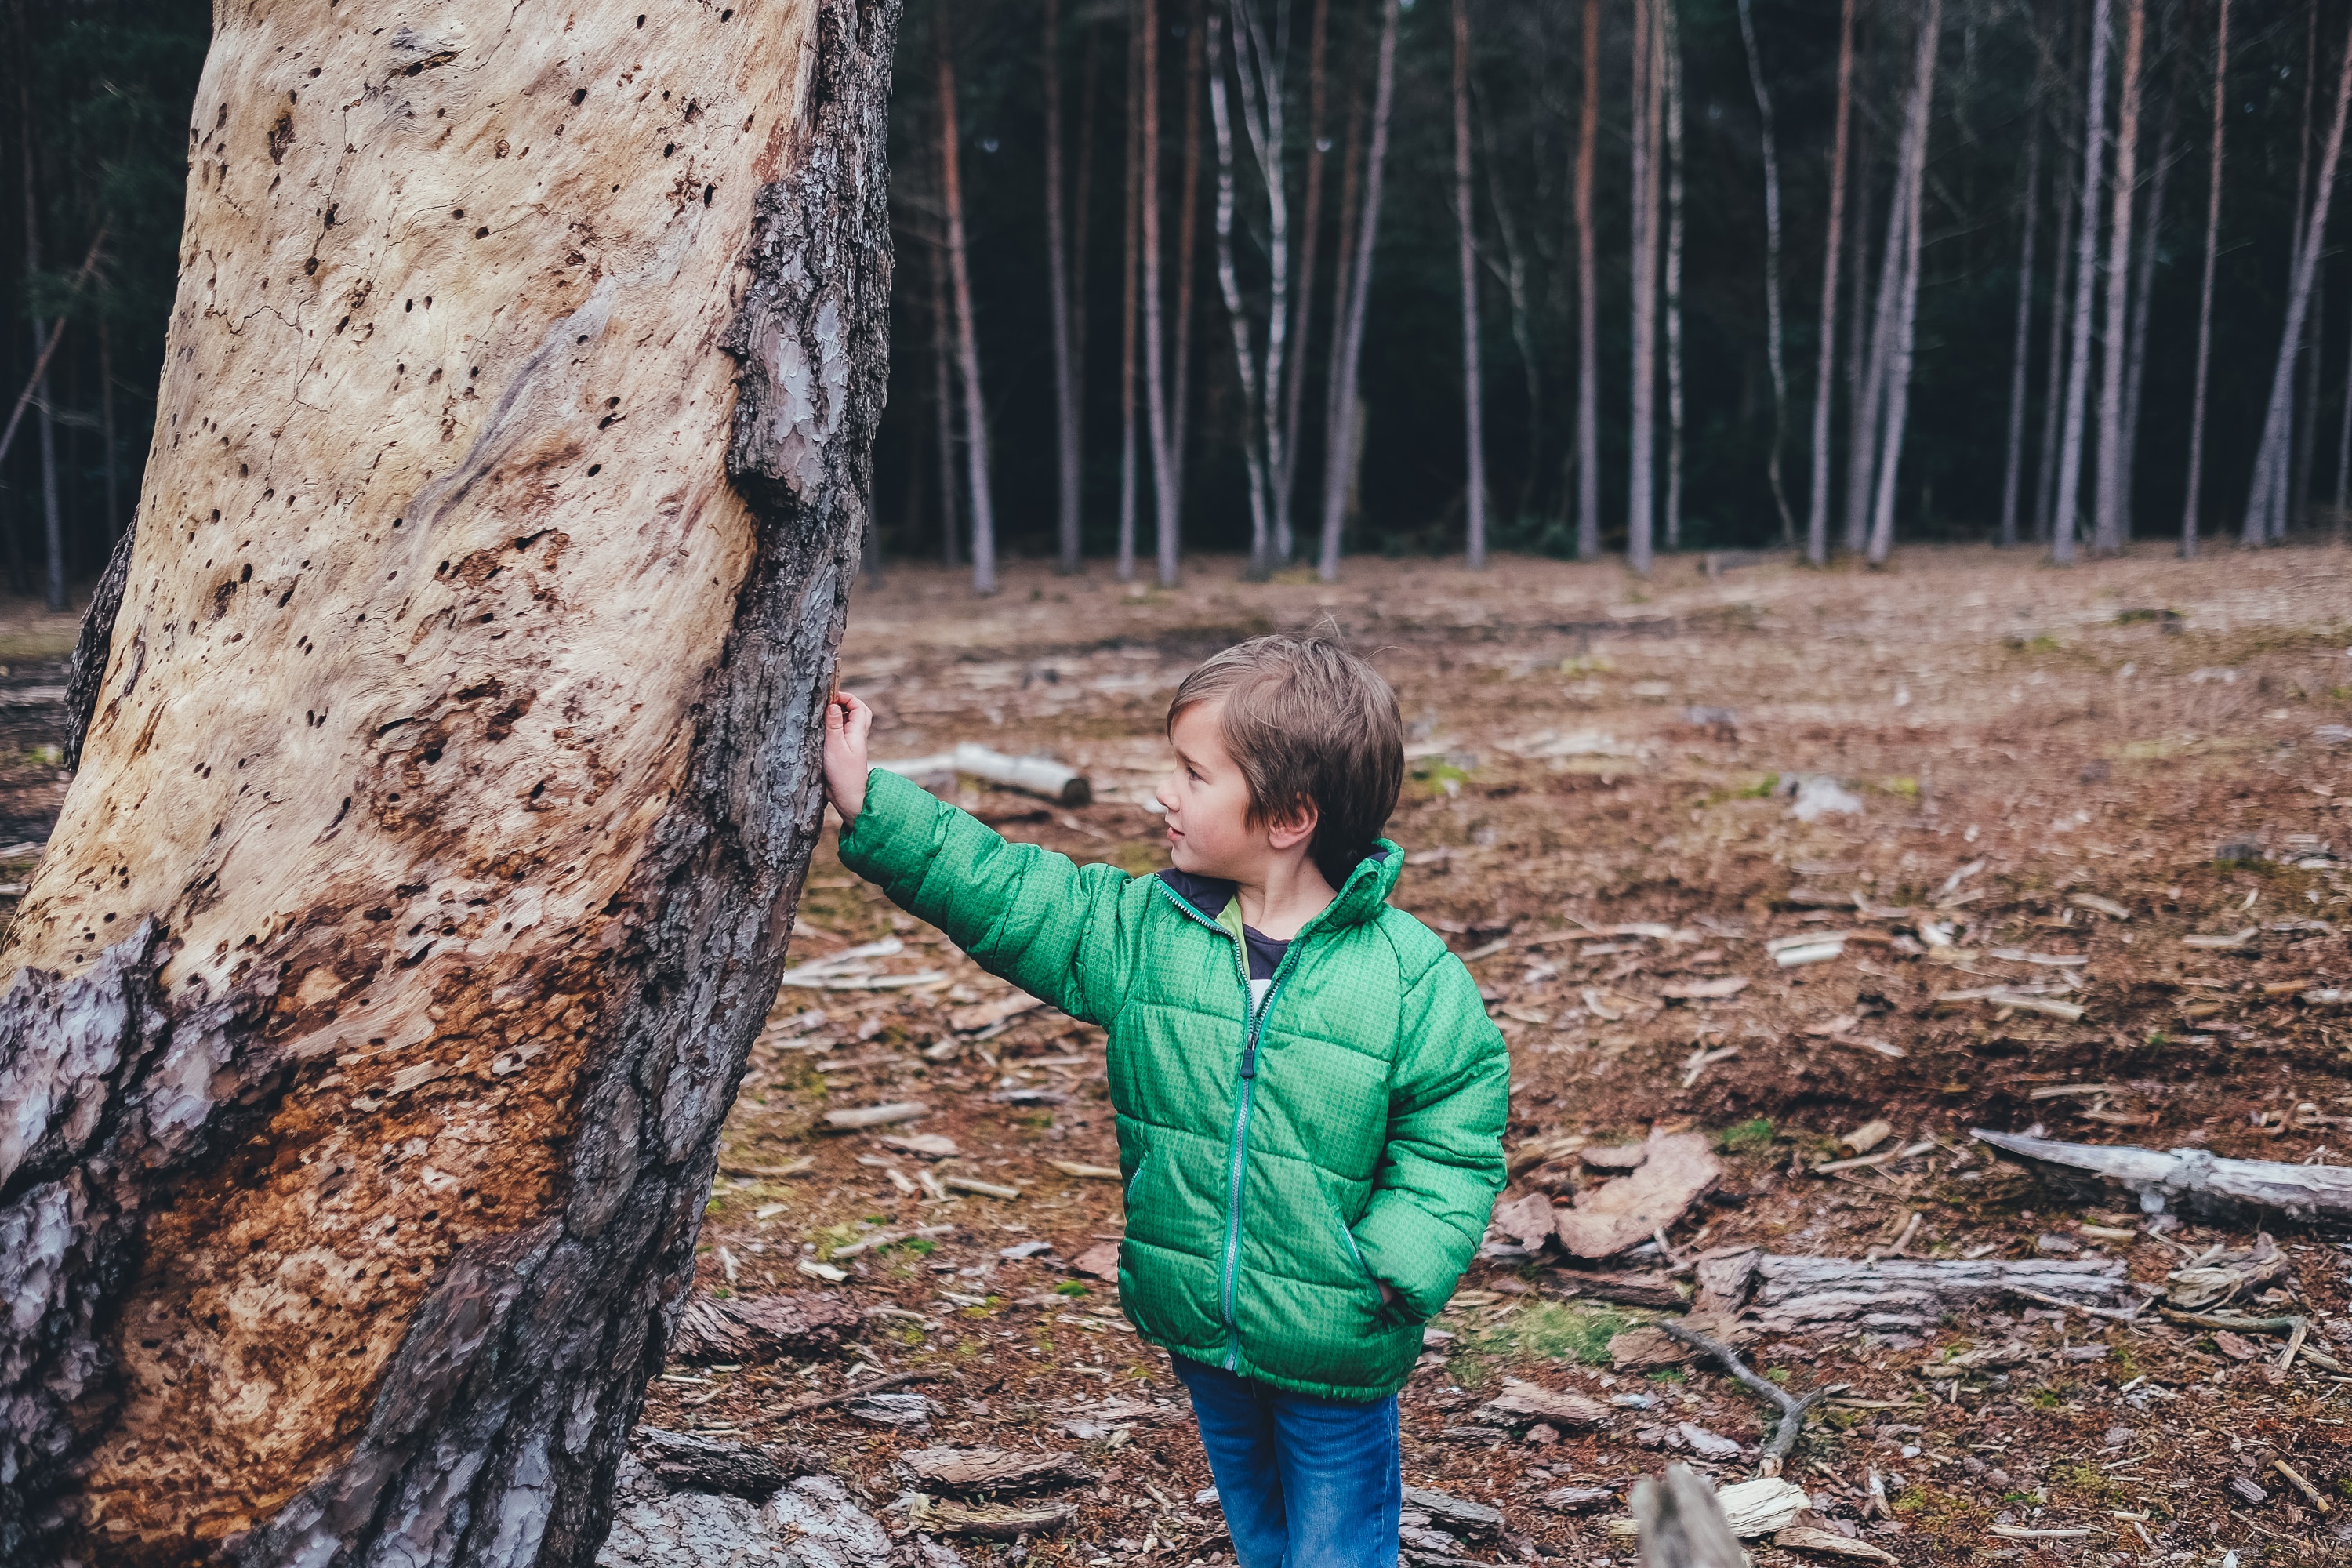  Parents should discuss the issue of eco-anxiety with children in an age-appropriate way.